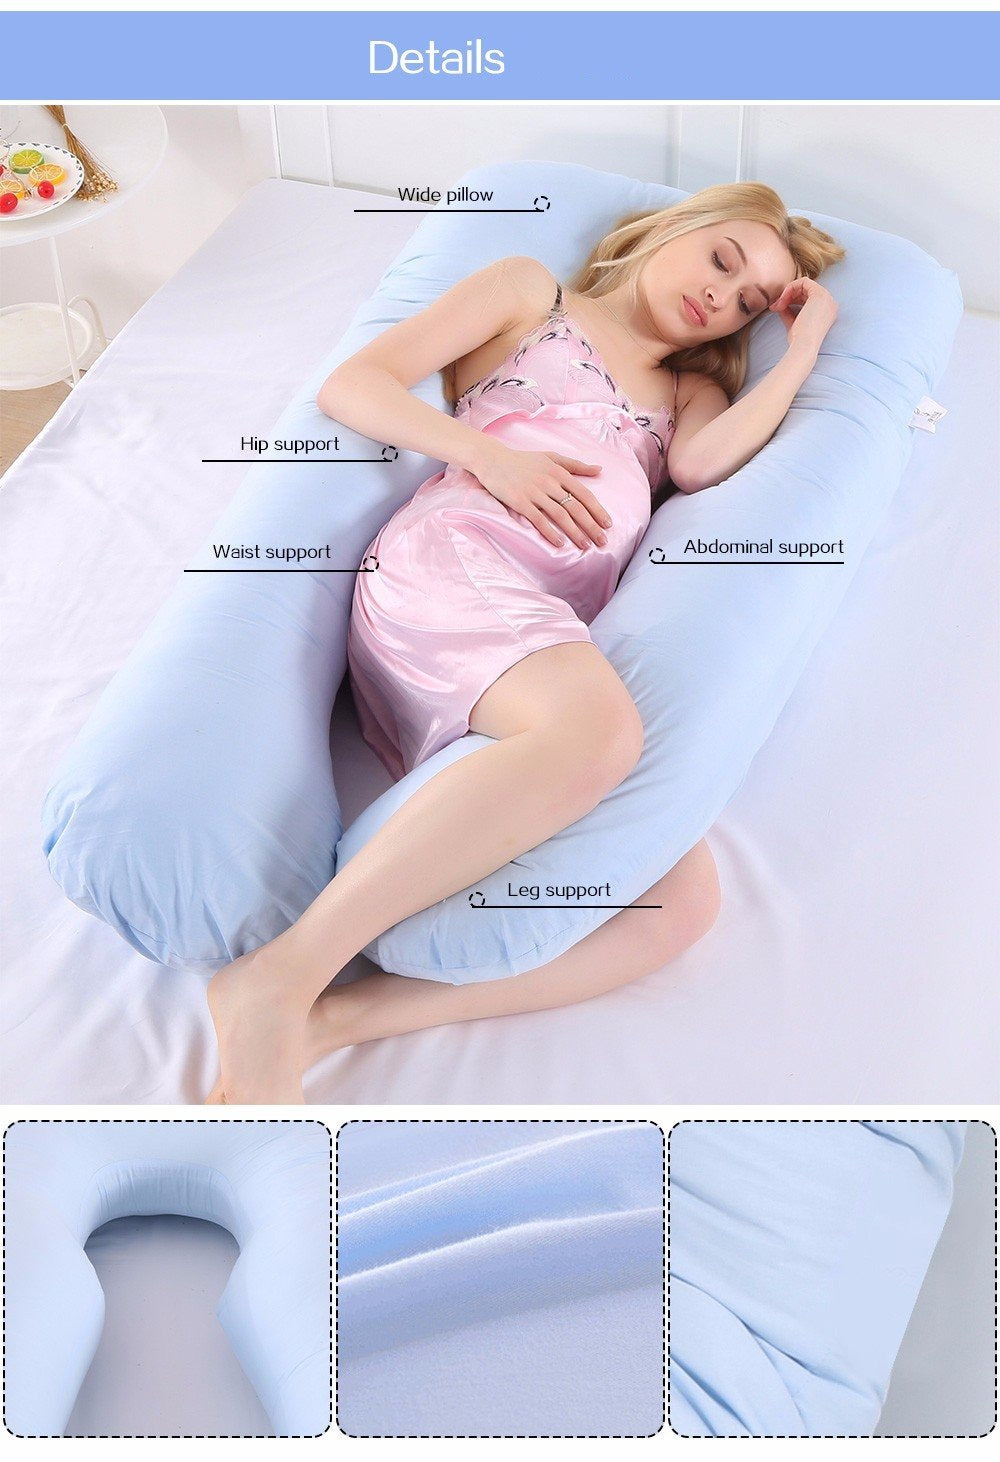  Oternal Pregnancy Pillow for Pregnant Women,Soft Pregnancy Body  Pillow,Support for Back, Hips, Legs,Maternity Pillow with Detachable and  Adjustable Pillow Cover : Baby